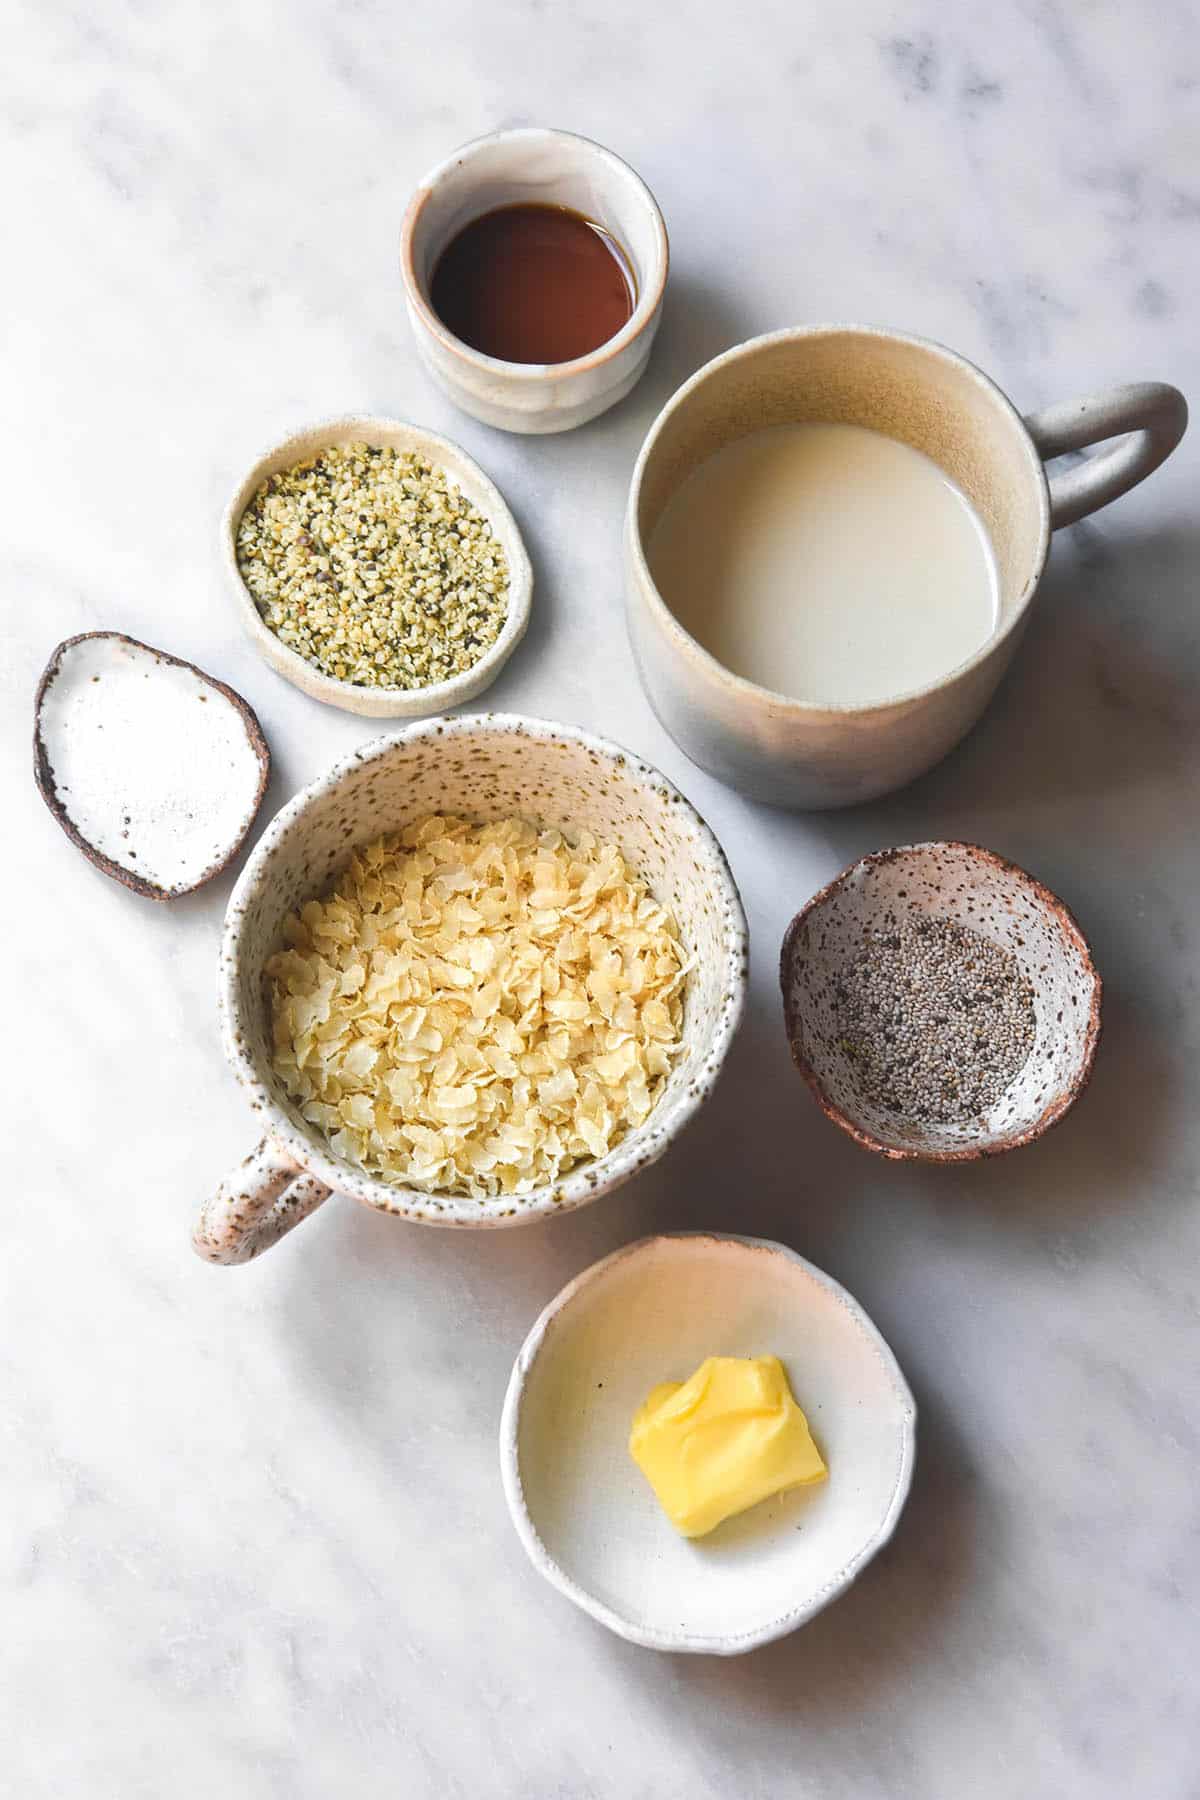 An aerial image of the ingredients used for gluten free porridge in small white ceramic bowls arranged casually on a white marble table. 